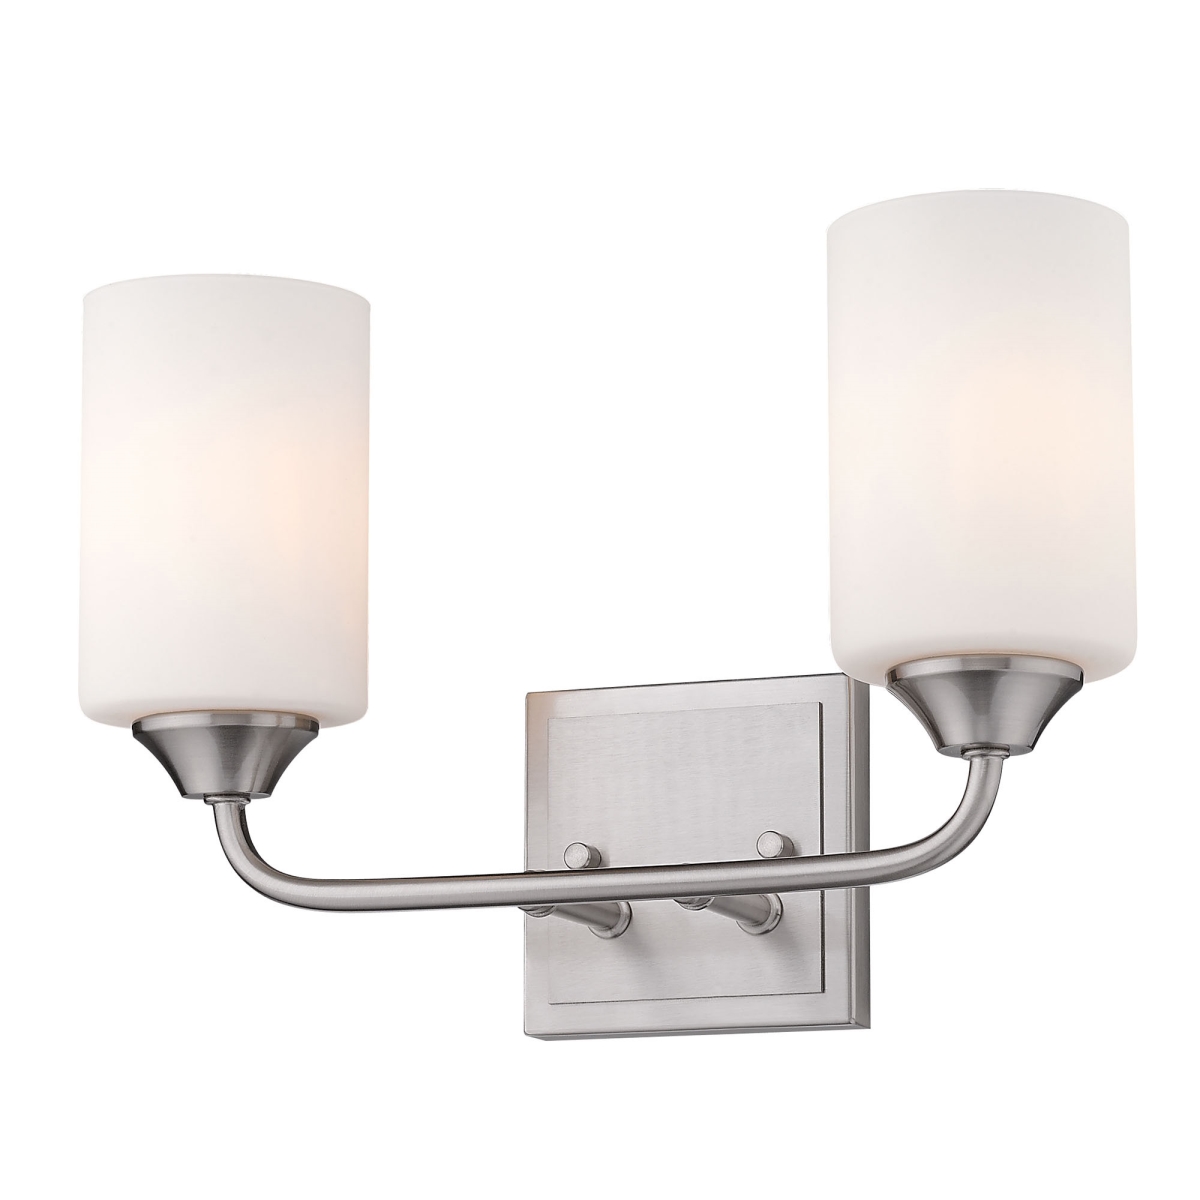 2120-ba2 Pw-cyl-op Ormond 2 Light Bath Vanity In Pewter With Cylindrical Opal Glass Shade